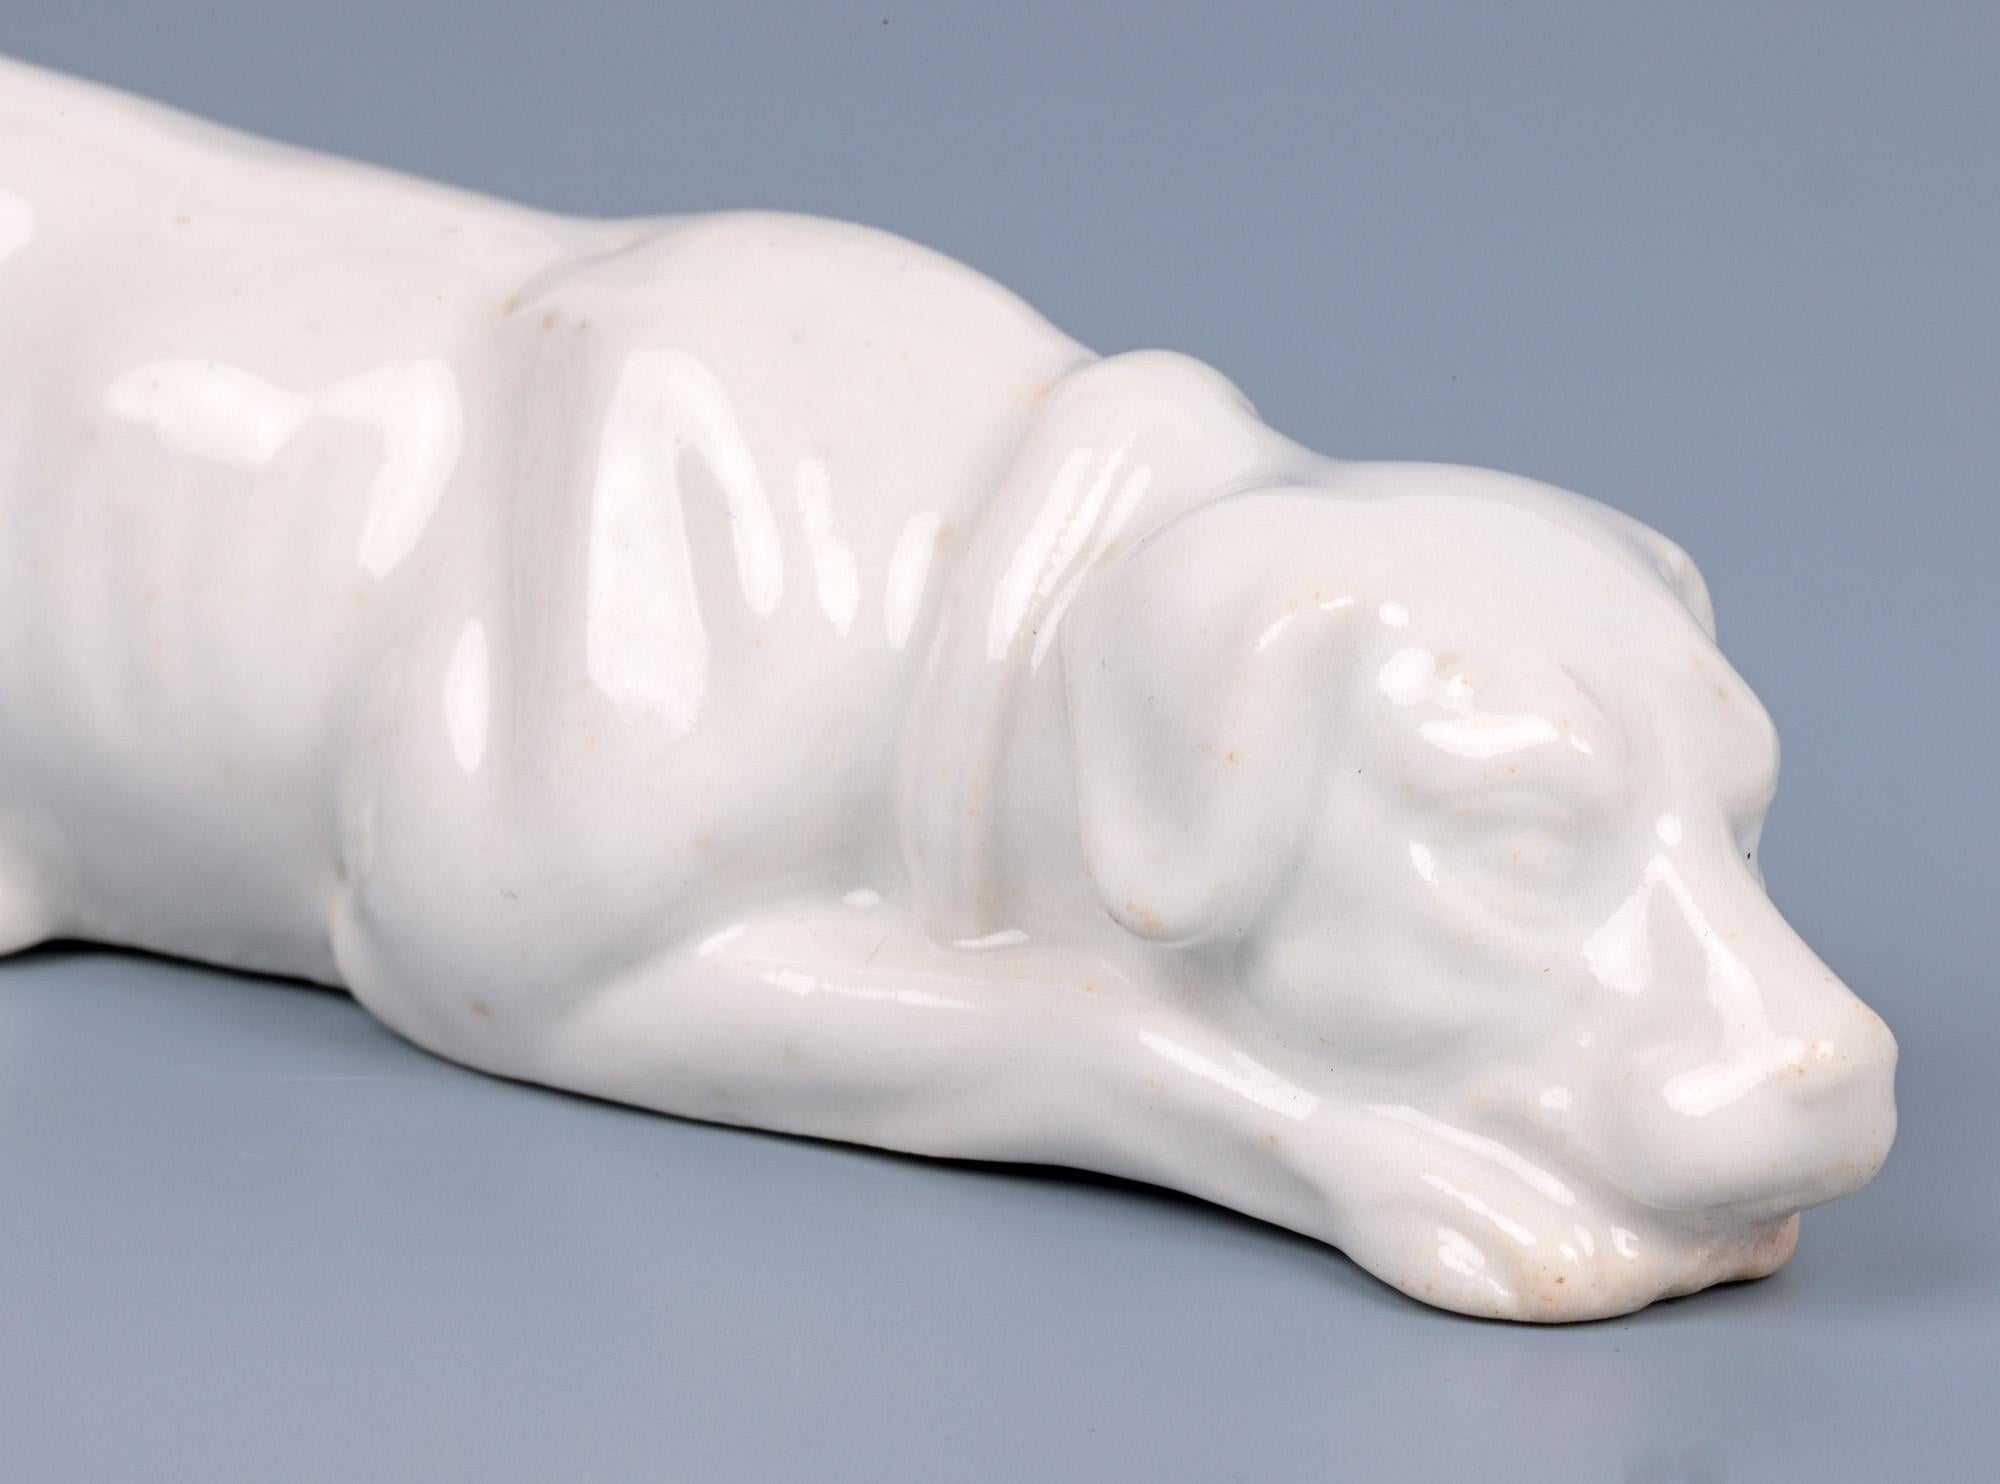 An exceptional antique, probably English, white glazed porcelain figure of a recumbent hound dating from the early 19th century. The figure is finely hand crafted with wonderful detail with the hound resting its head on its outstretched front paws